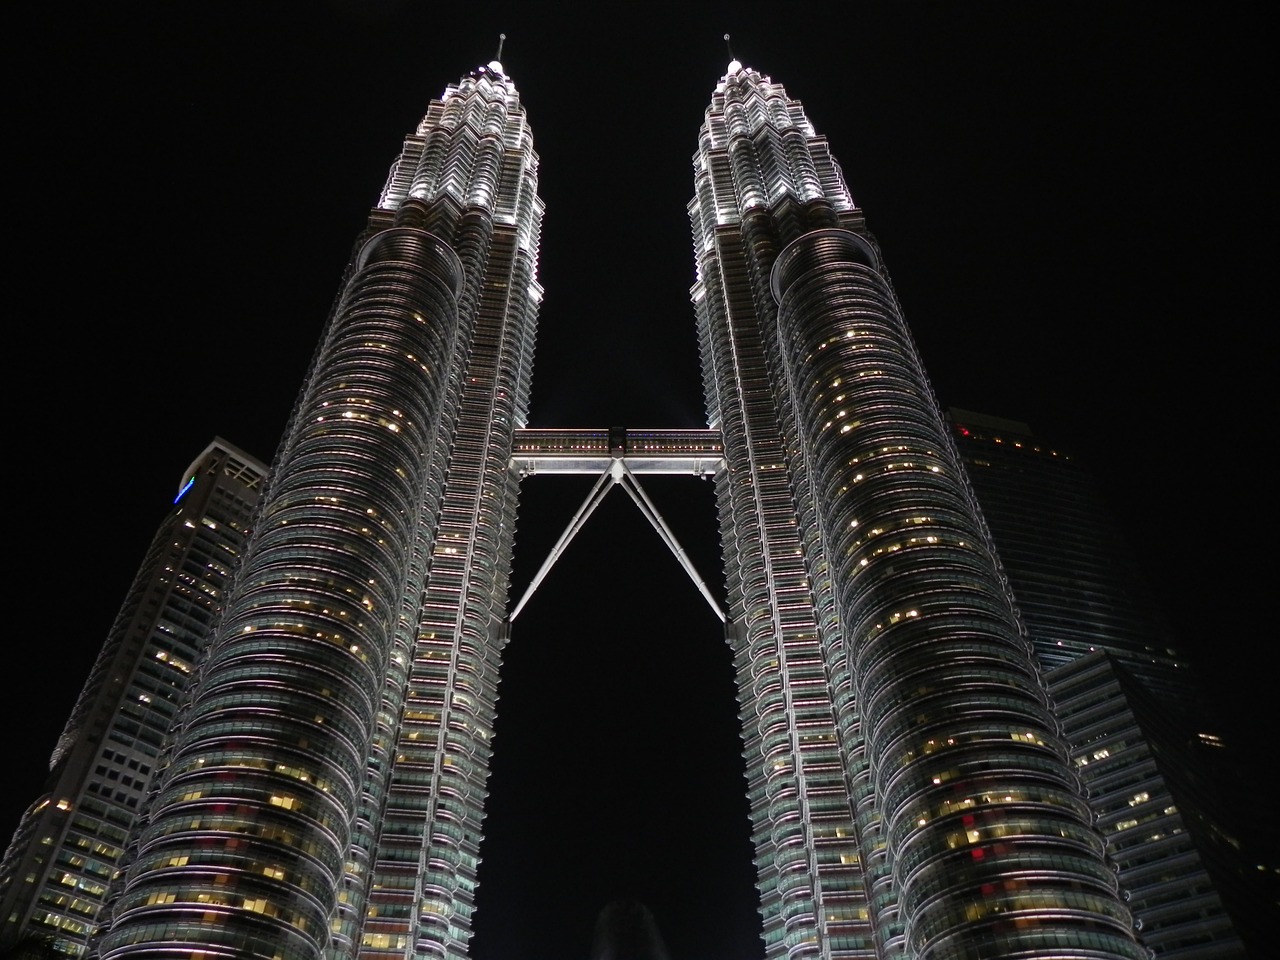 Malaysia Adventure with Infant - 5 Days